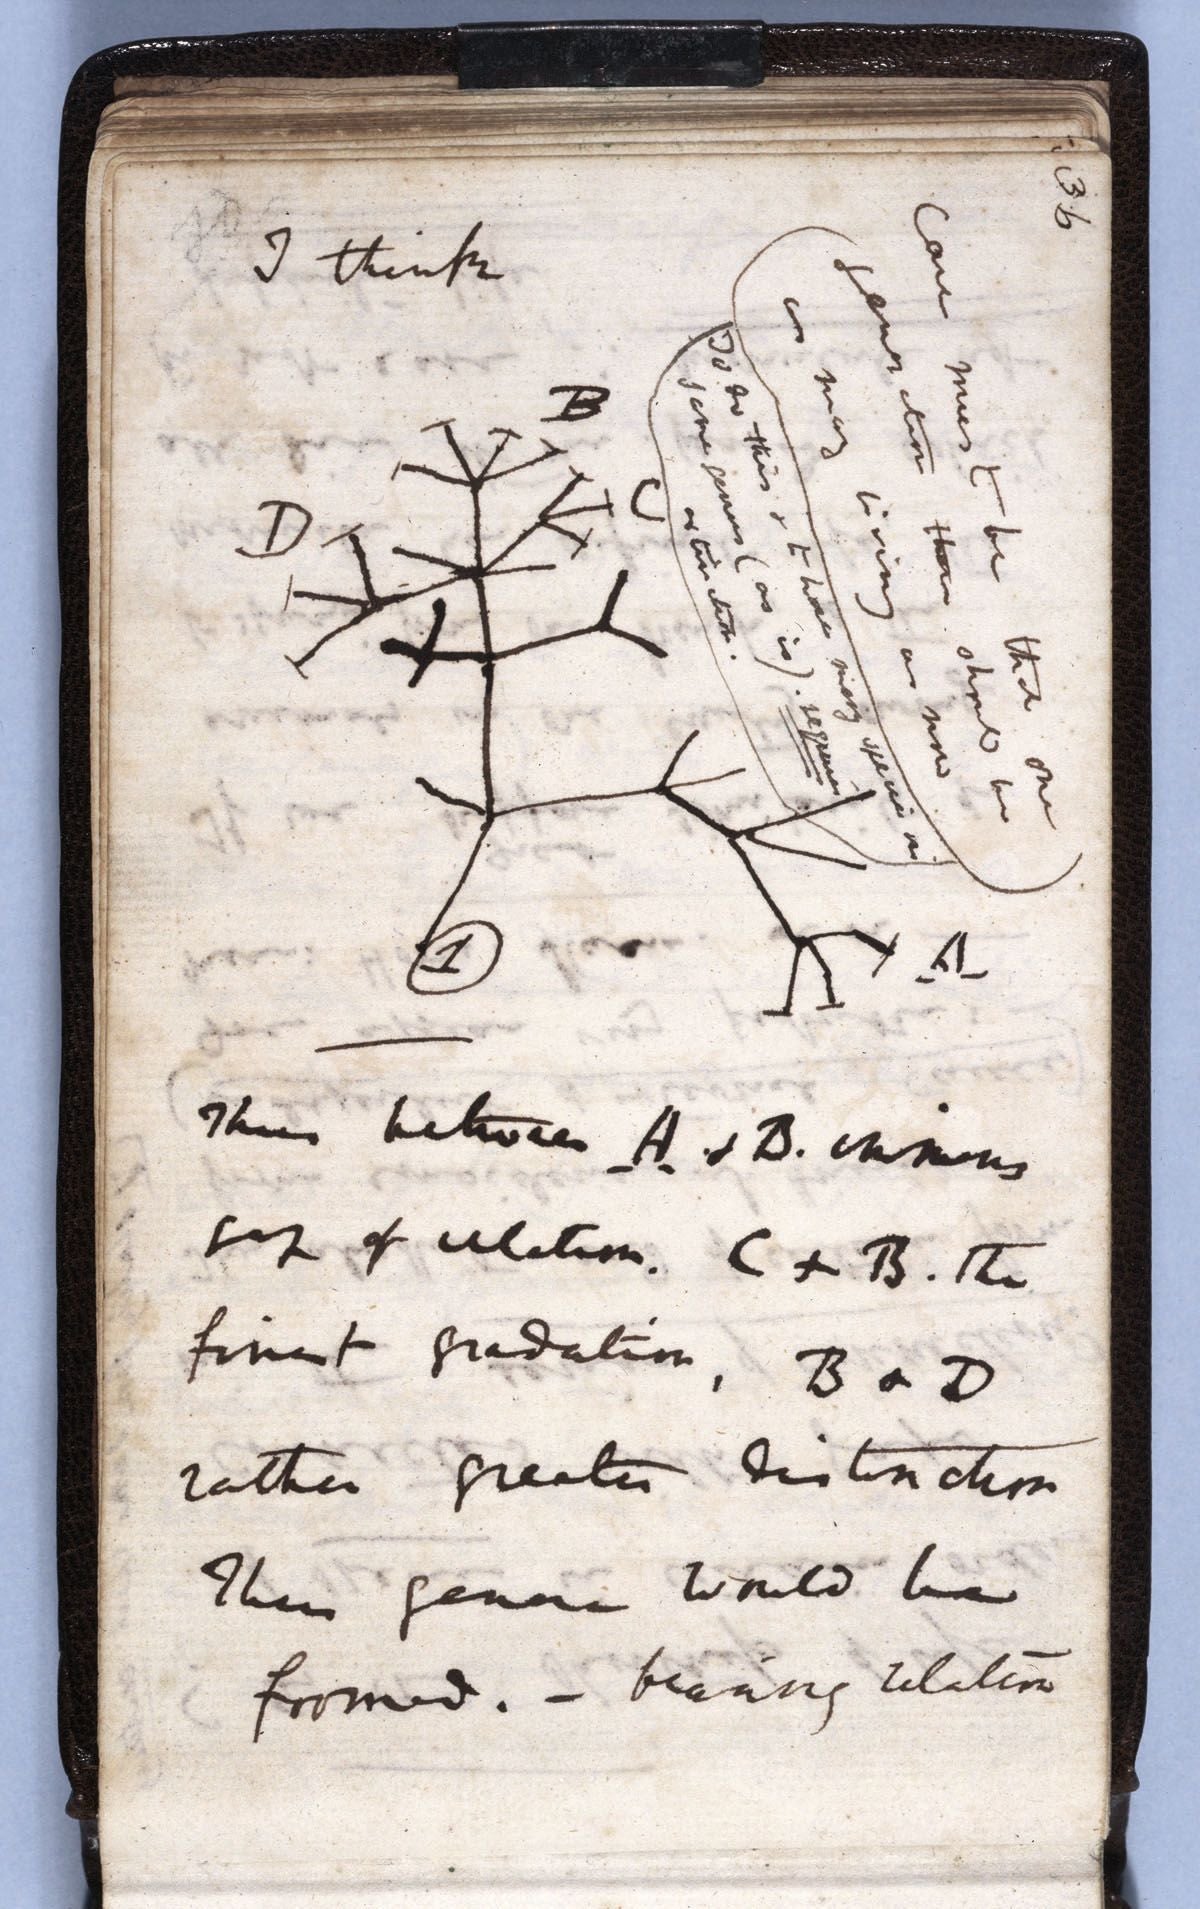 One of Charles Darwin’s missing notebooks contained his Tree of Life sketch from July, 1837.